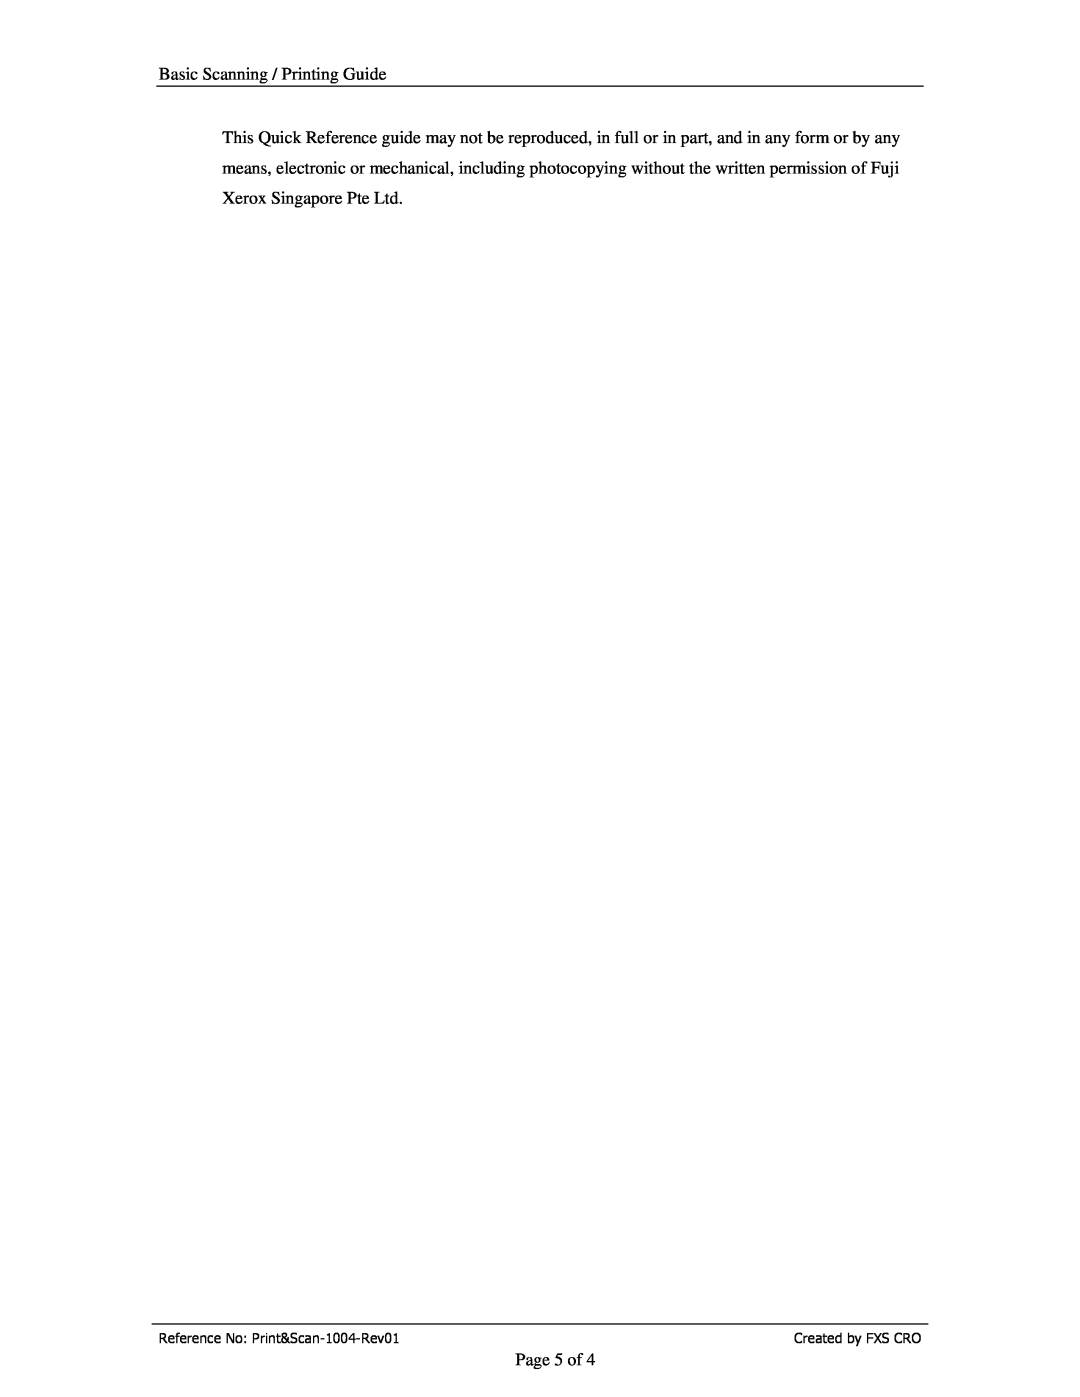 Xerox DCC320, DCC240 manual Basic Scanning / Printing Guide, Page 5 of 